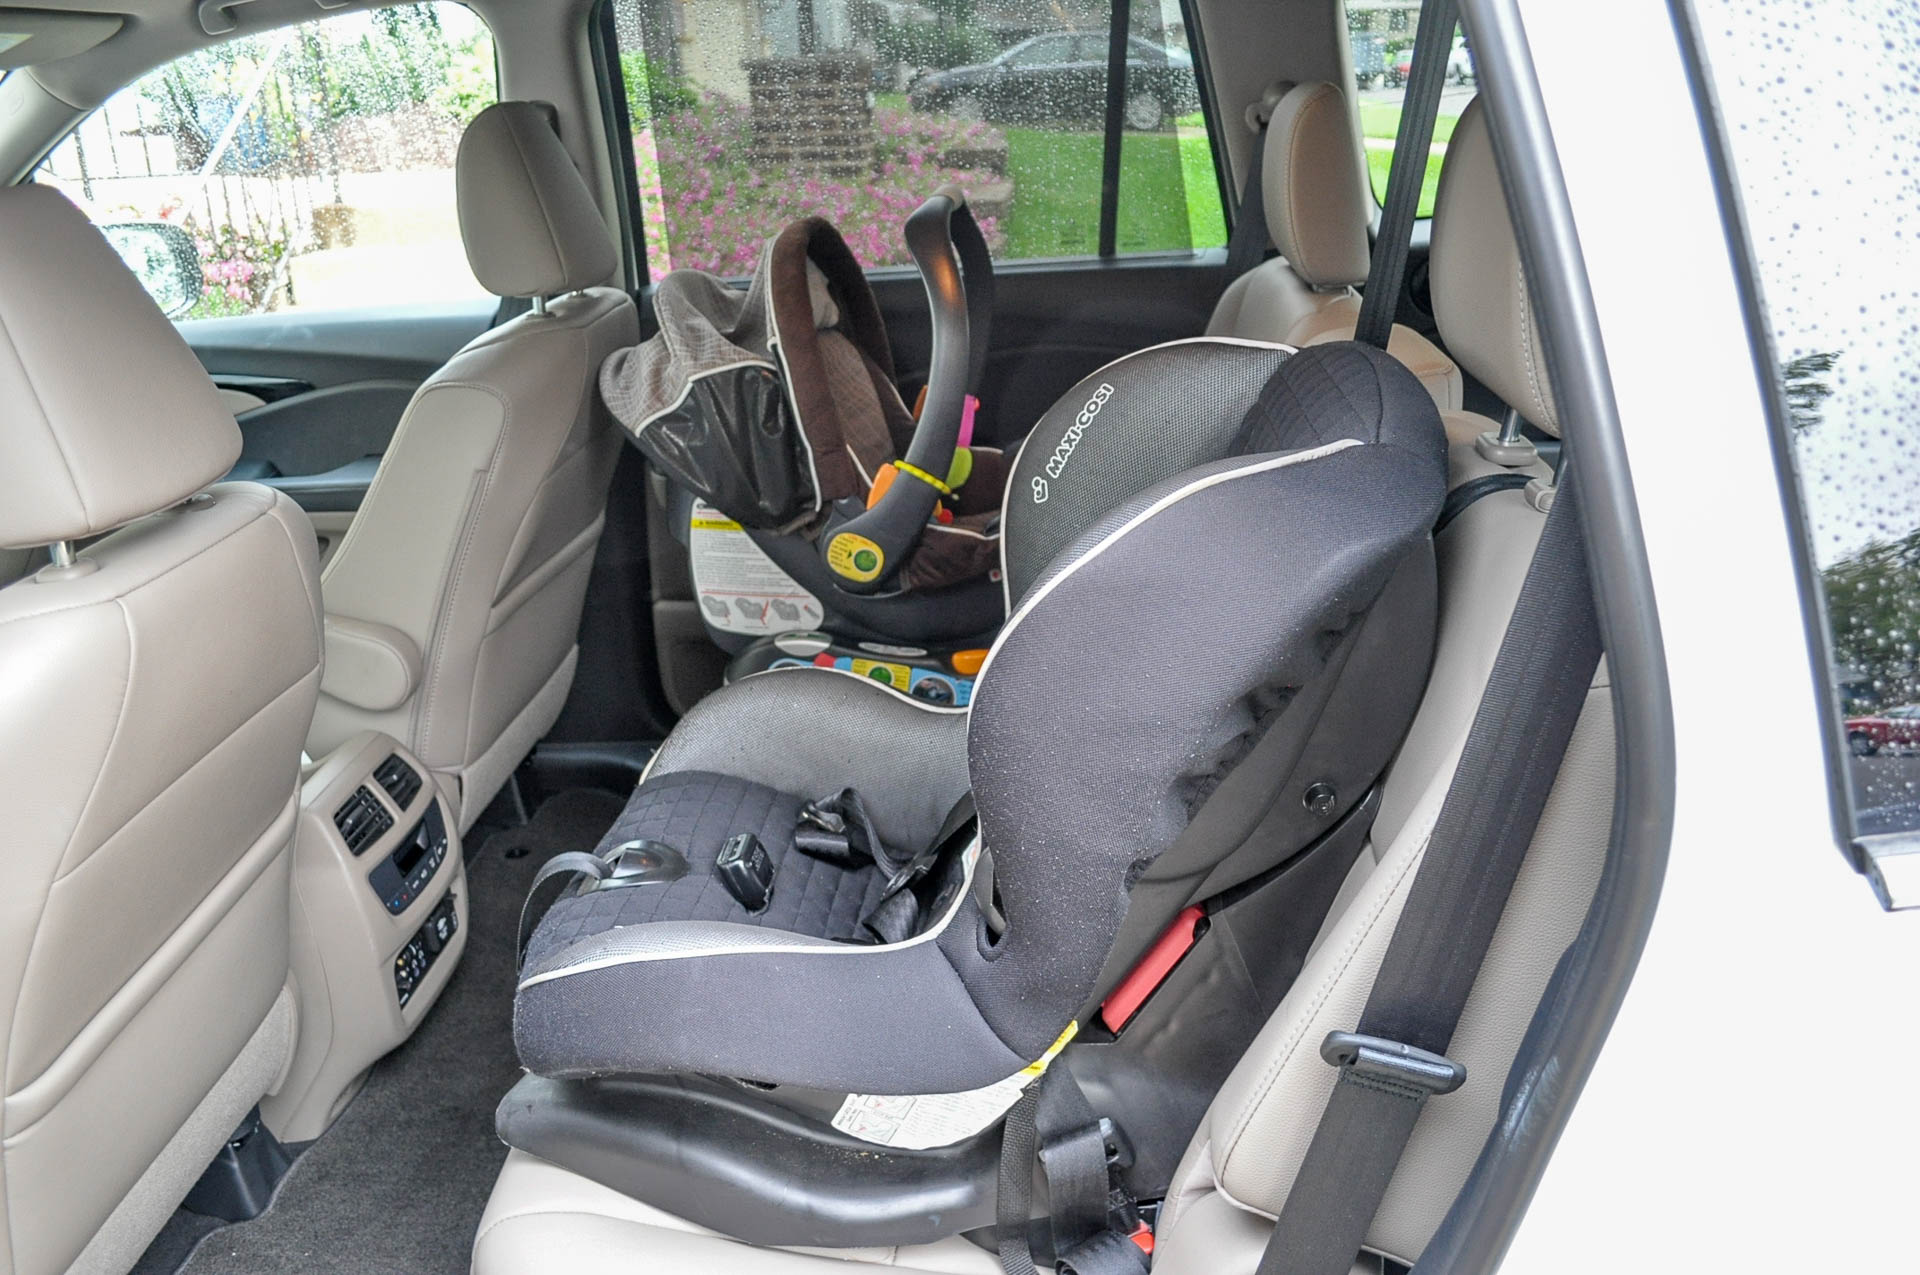 Yes, car seats expire and here's why1920 x 1275